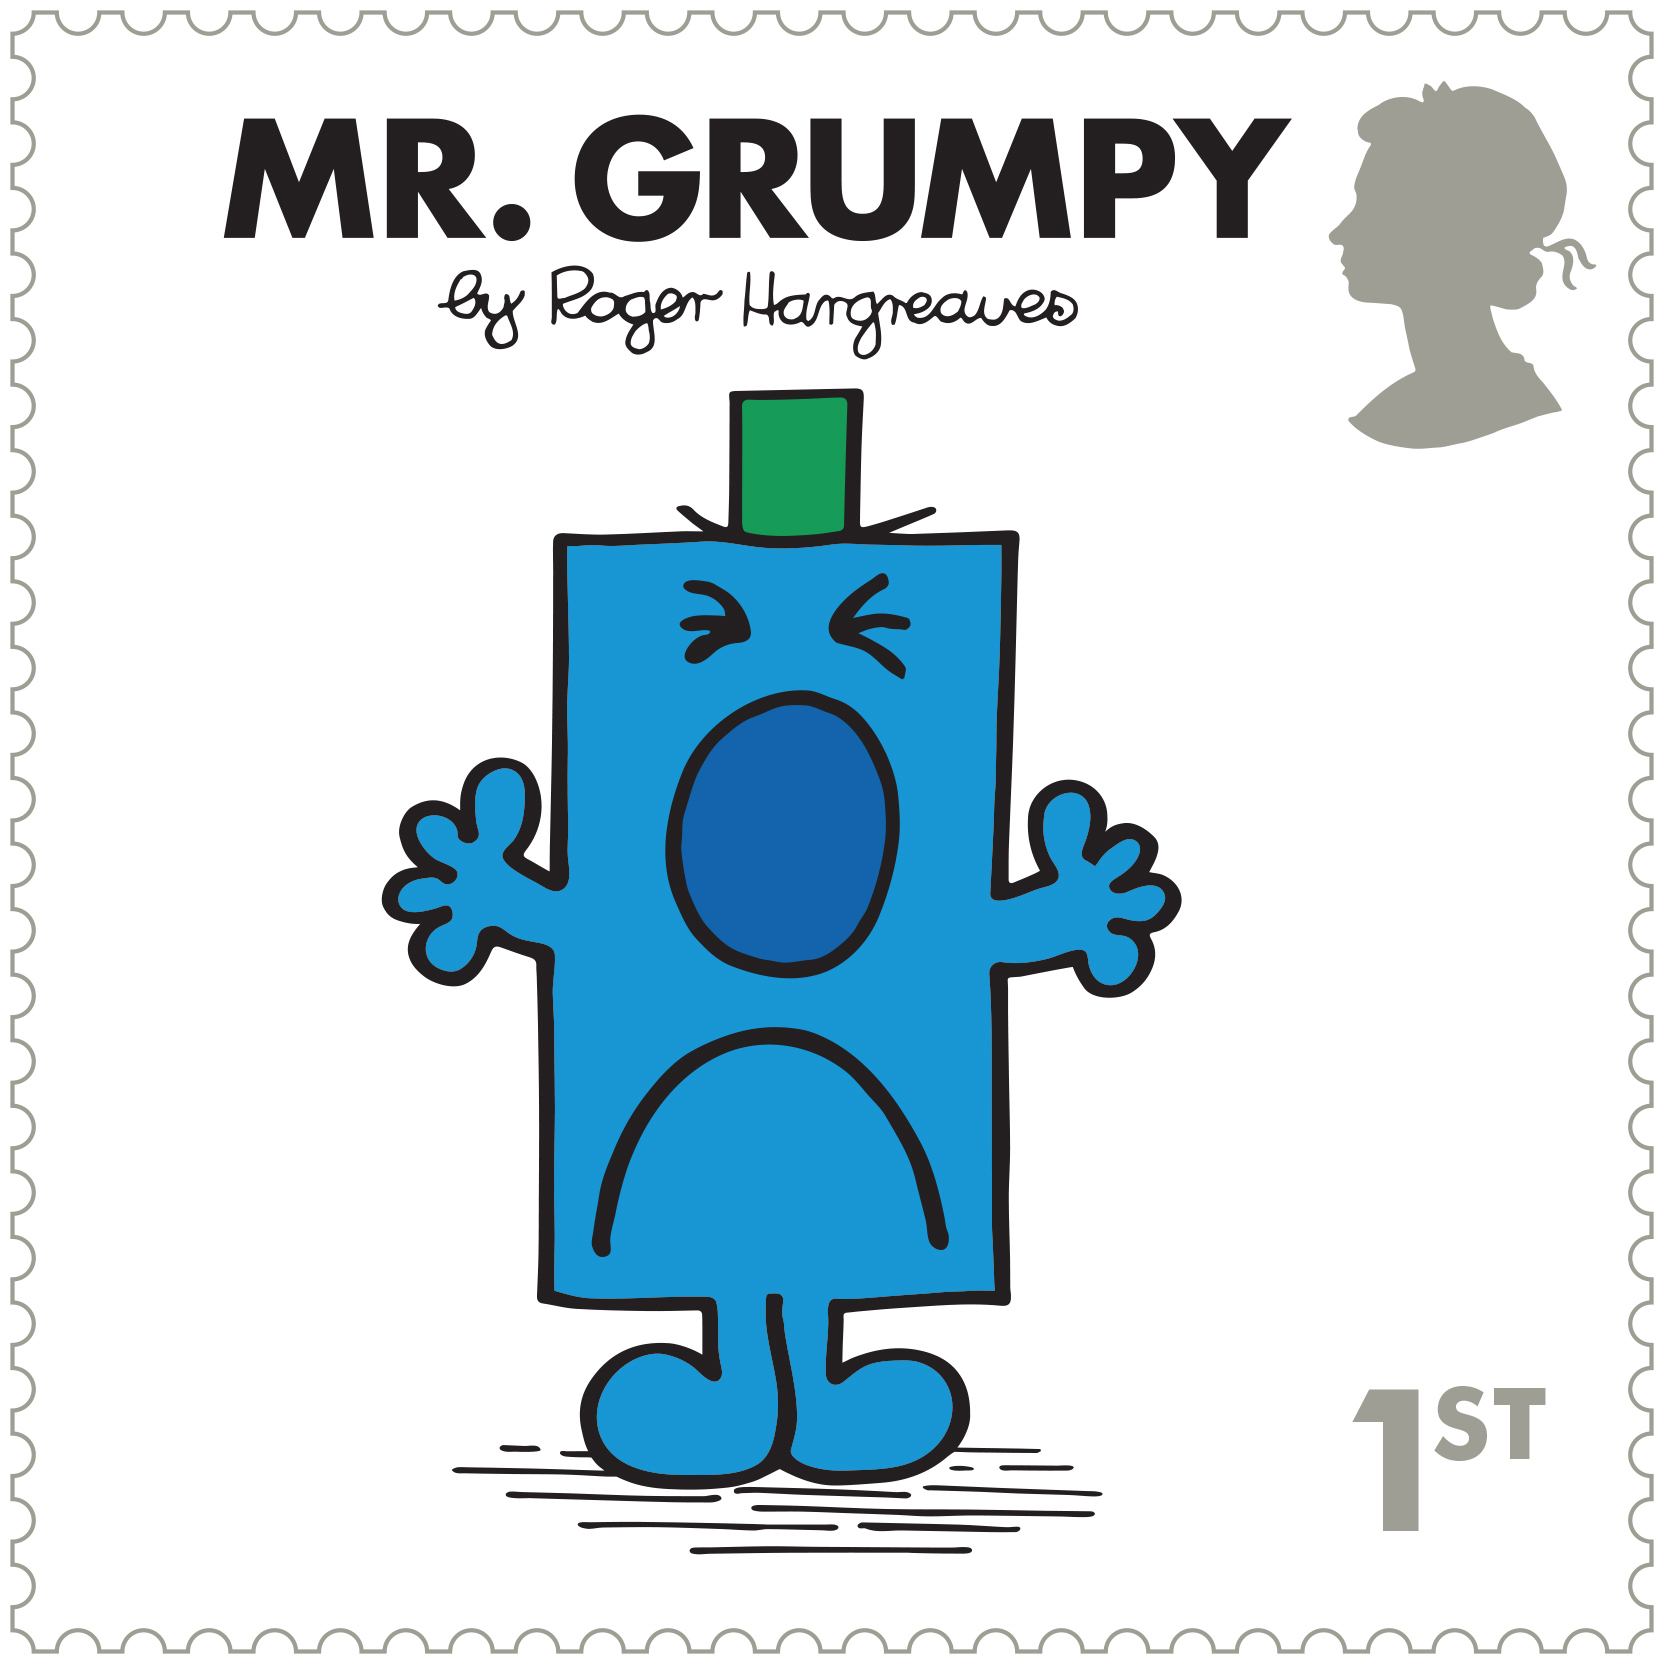 Mr Men and Little Miss stamps - Mr Grumpy (Royal Mail/PA)